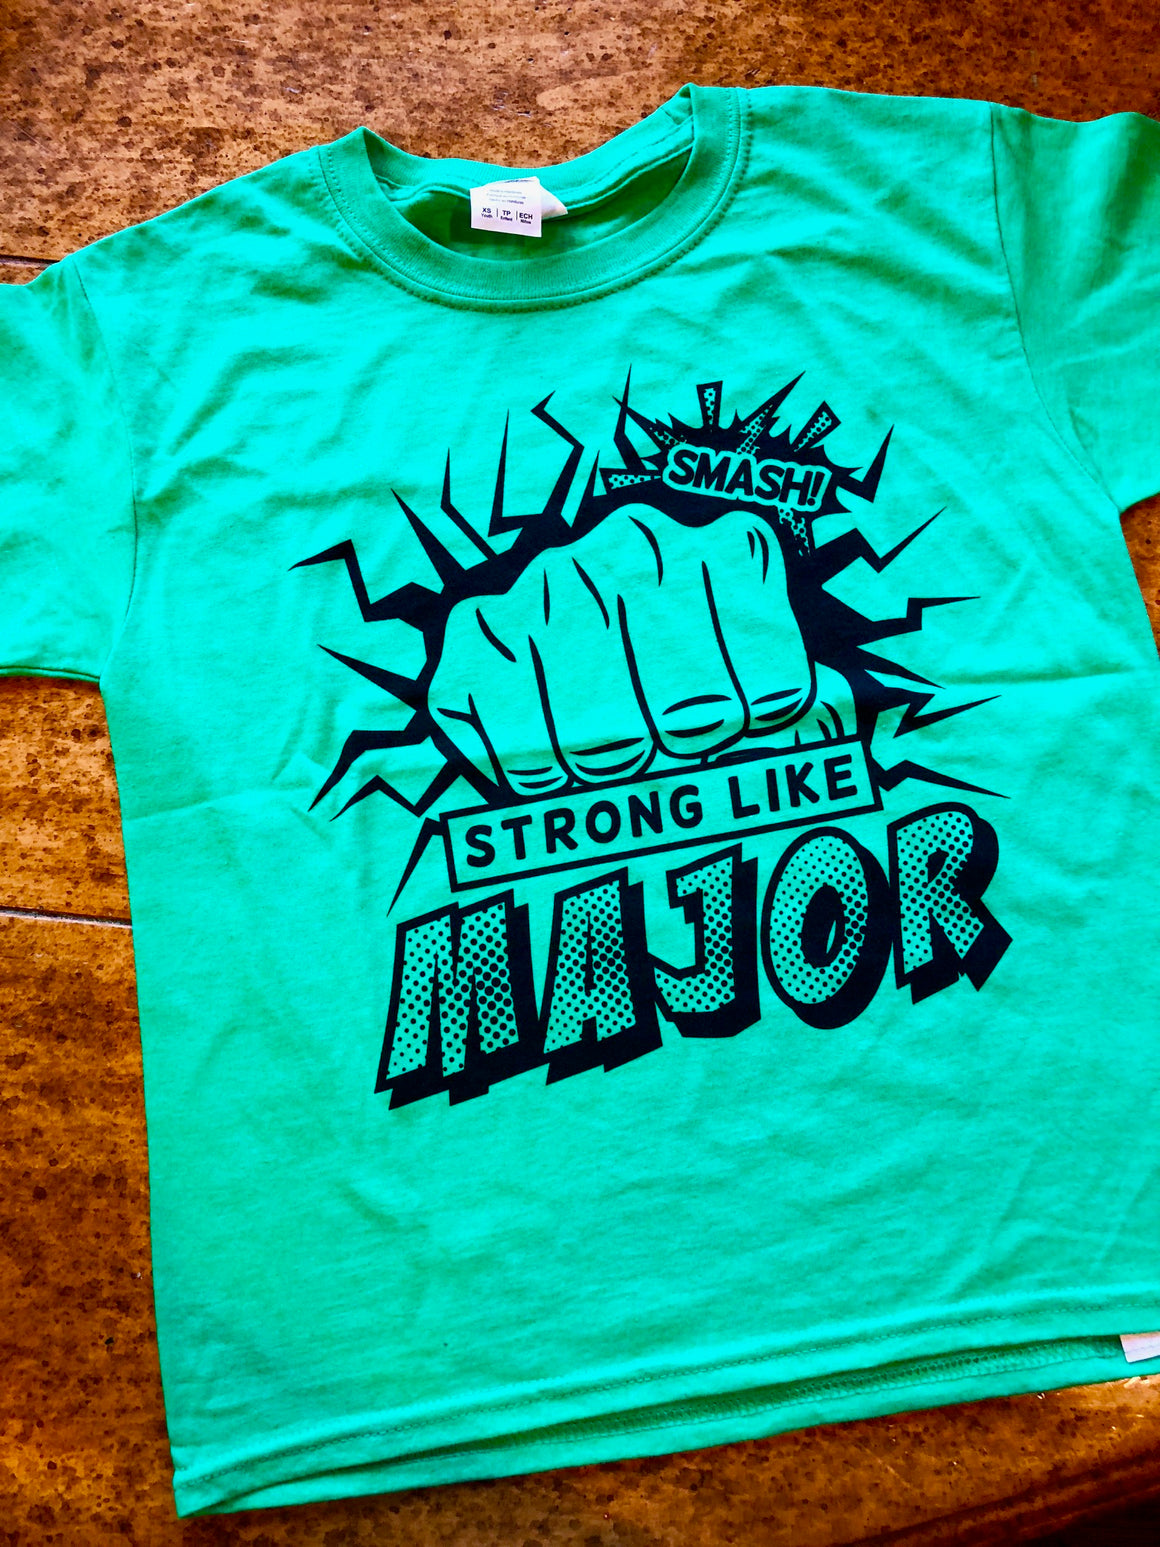 Strong Like Major t-shirt supporting CHD (congenital heart defects)